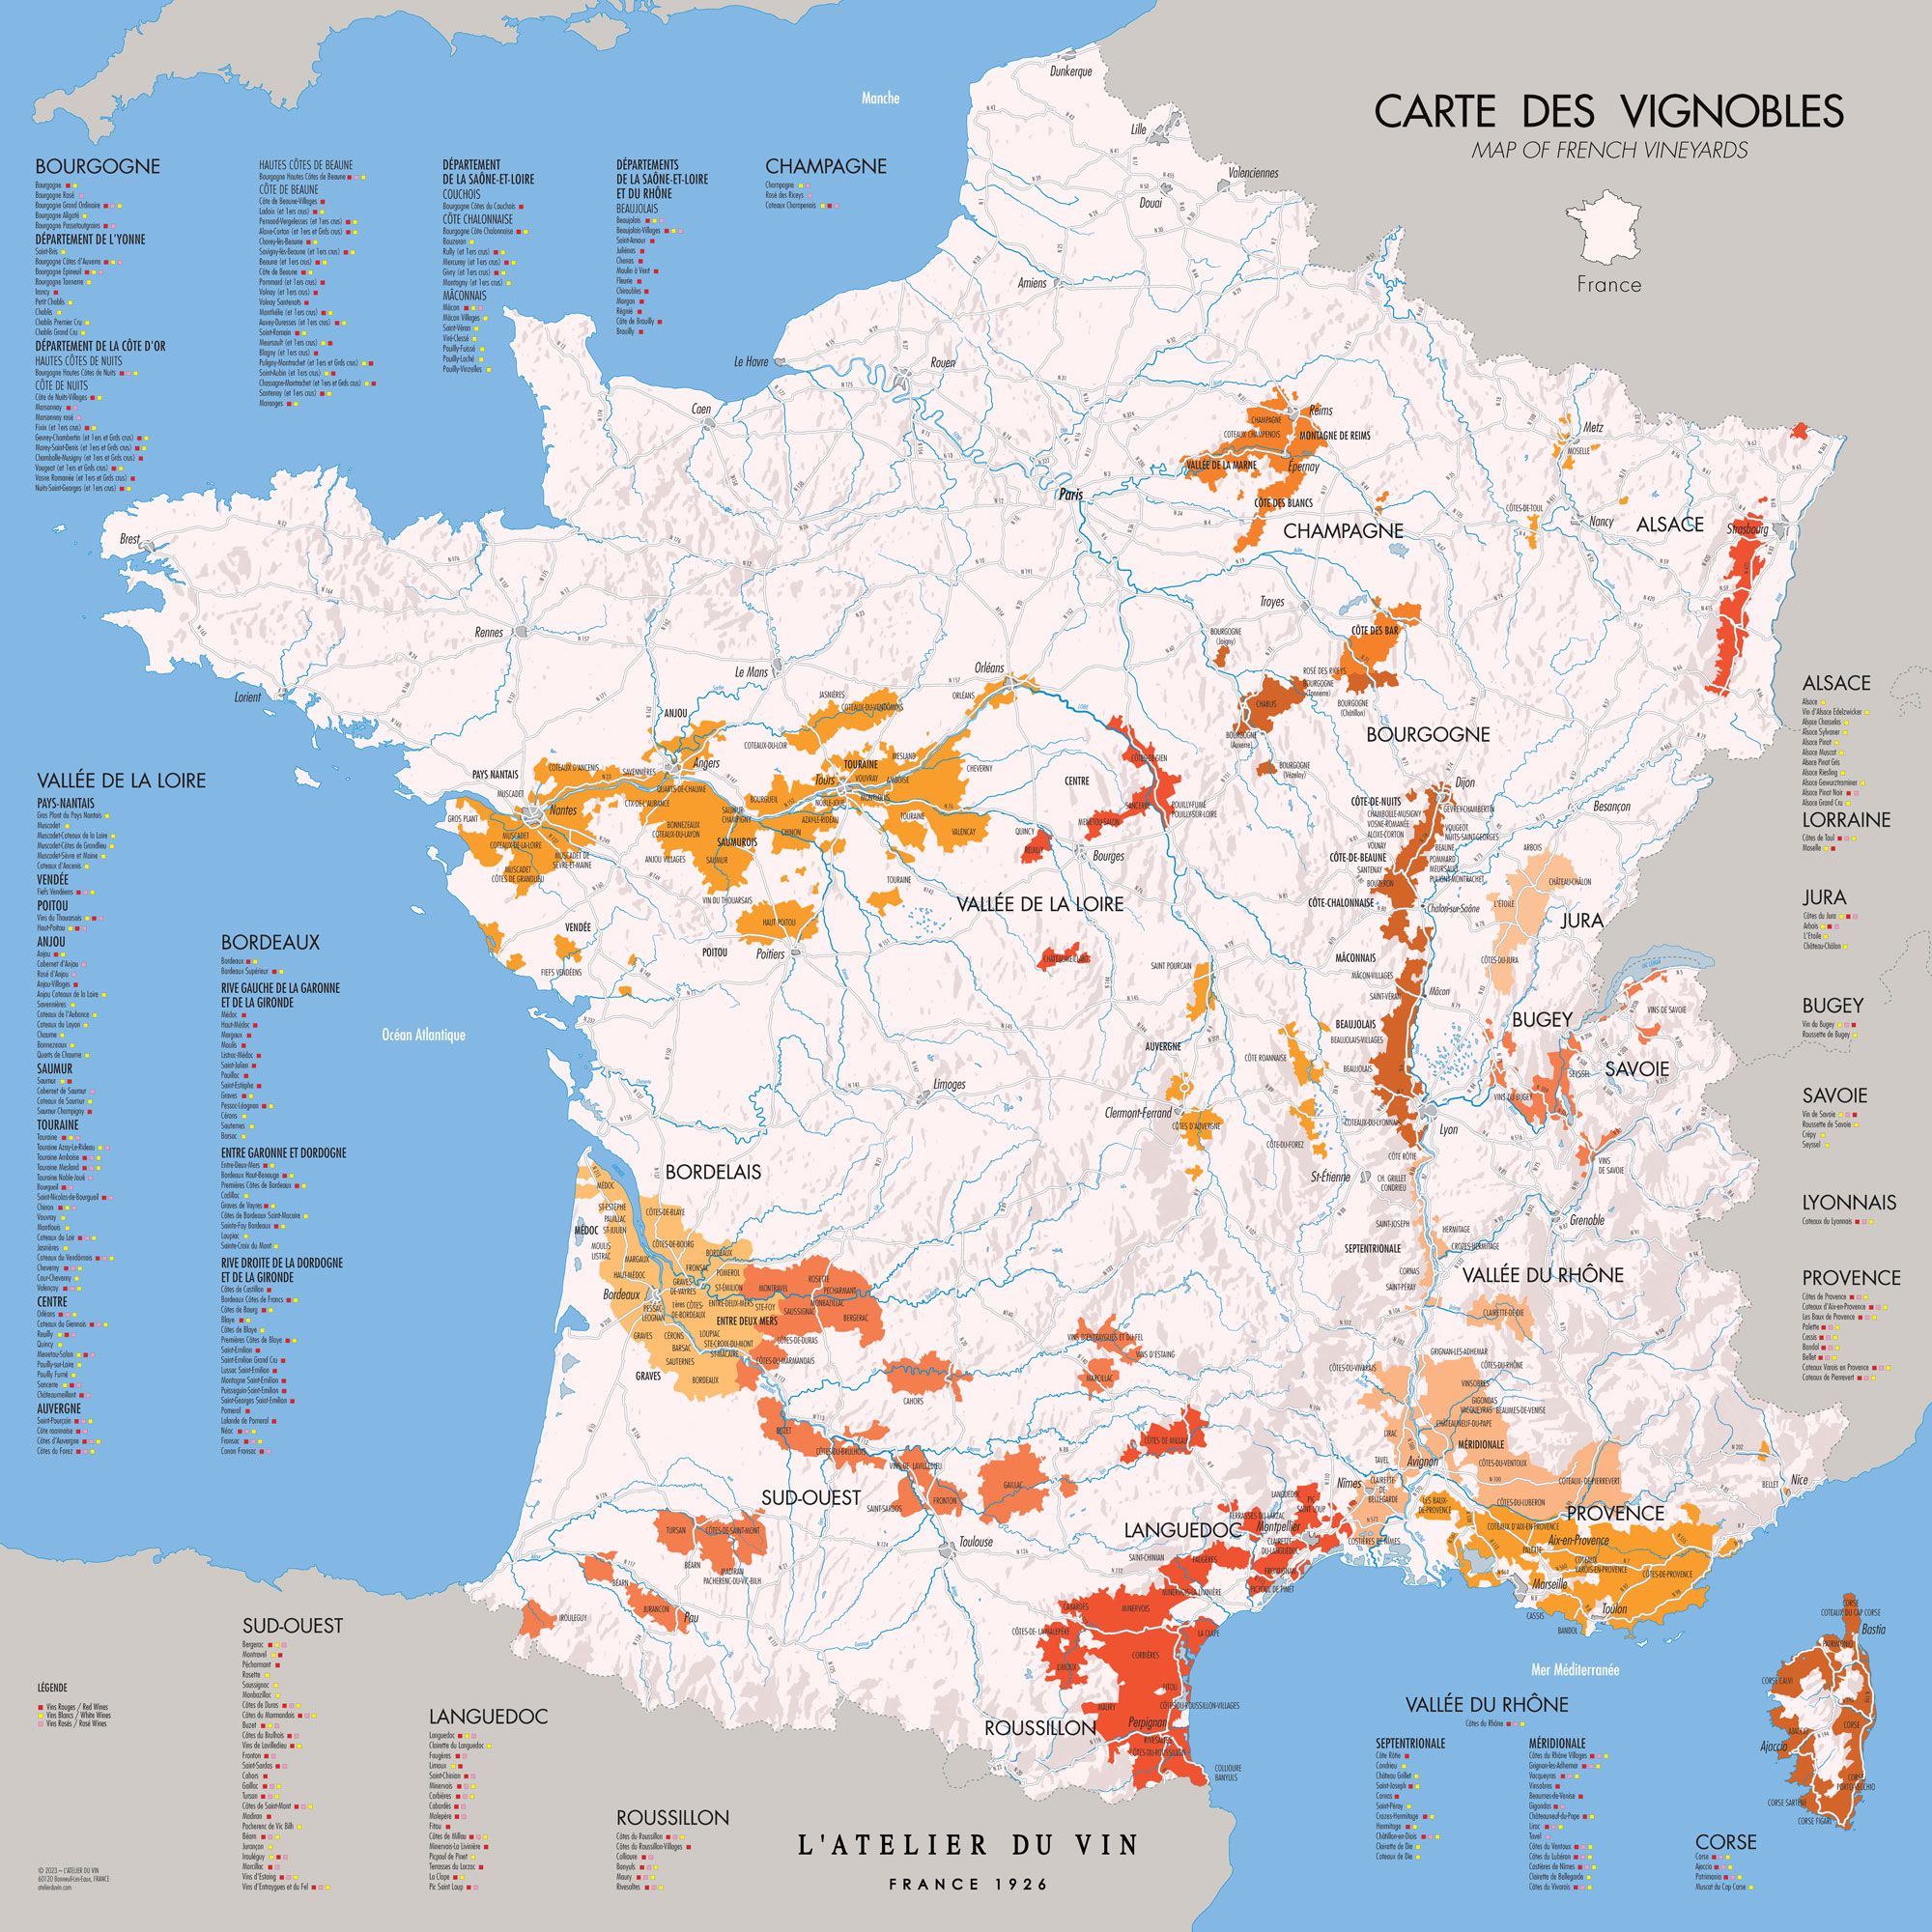 Map of French vineyard